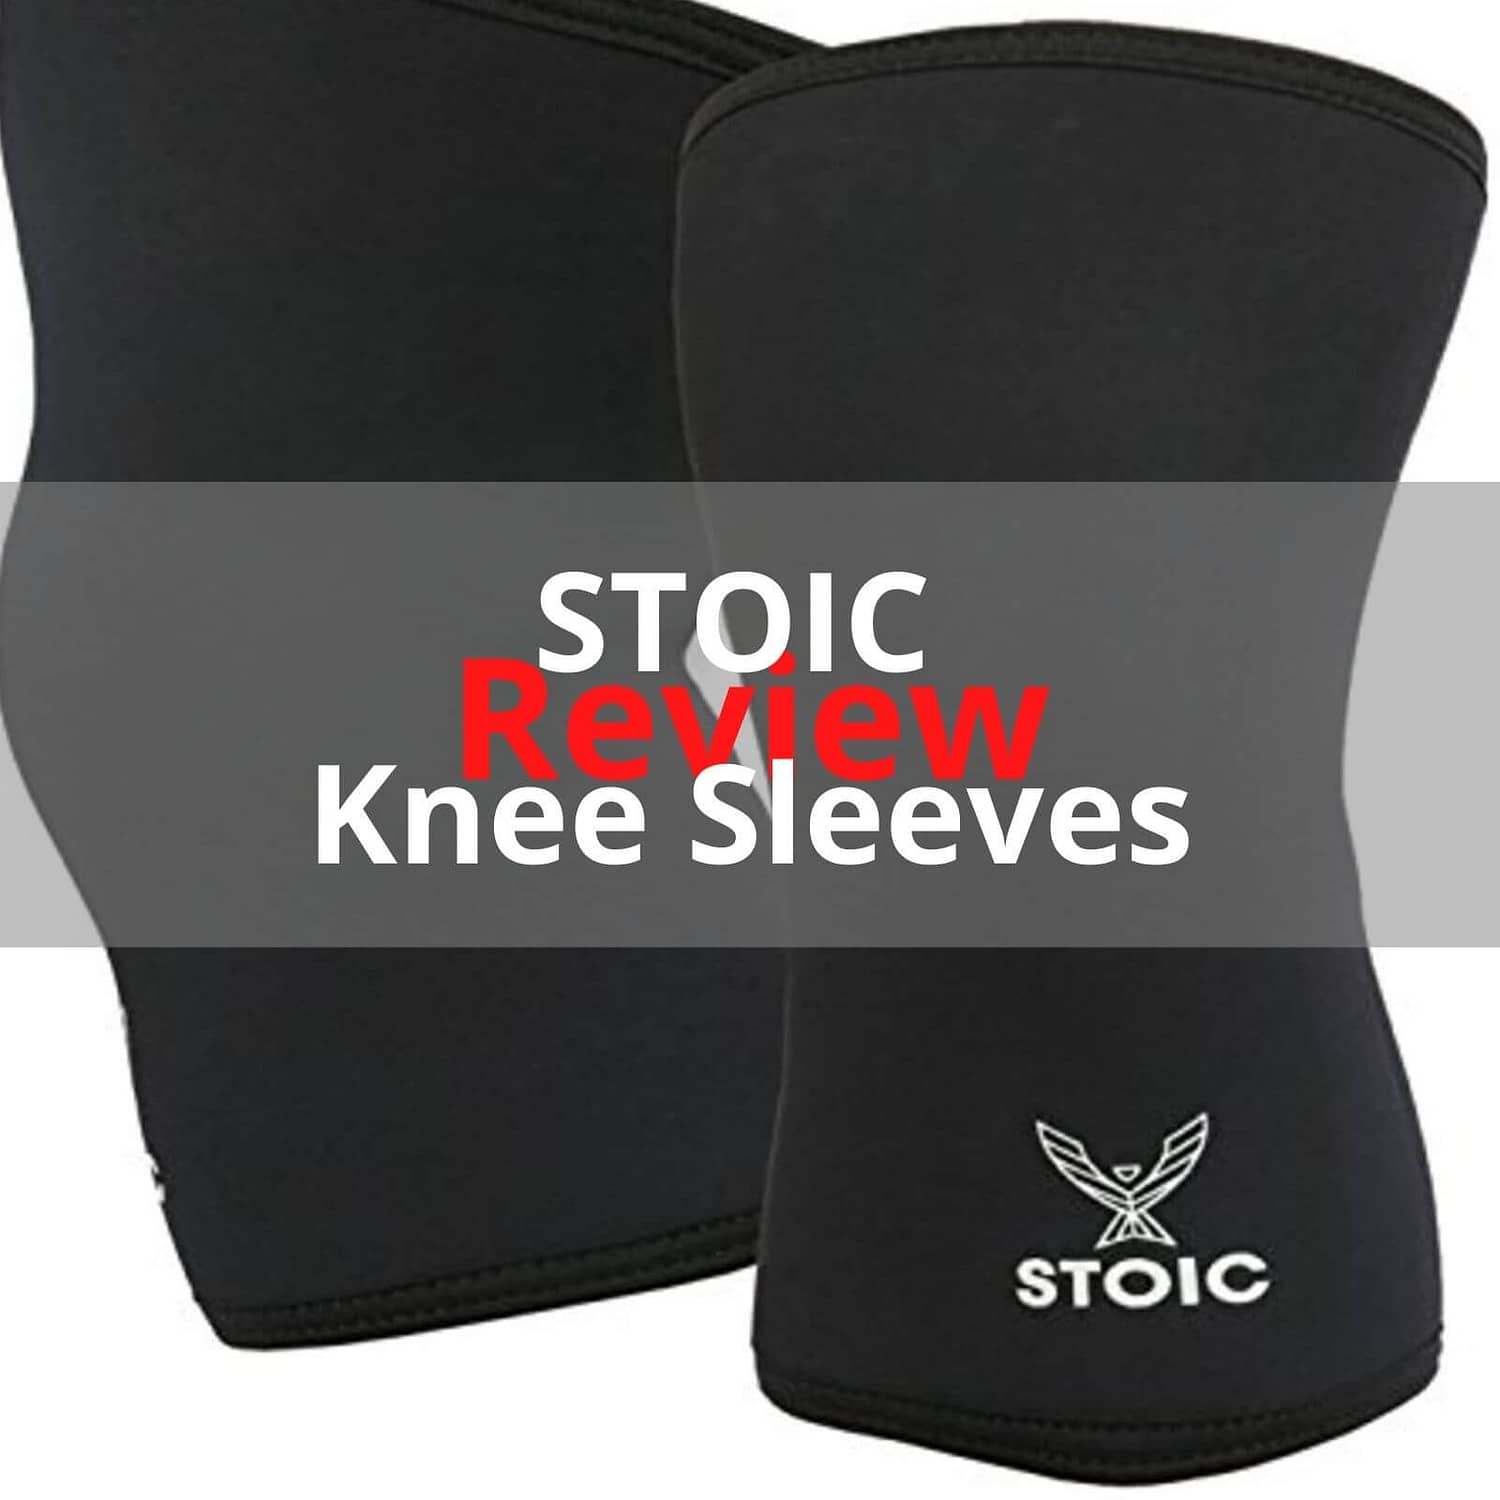 Stoic knee sleeves review